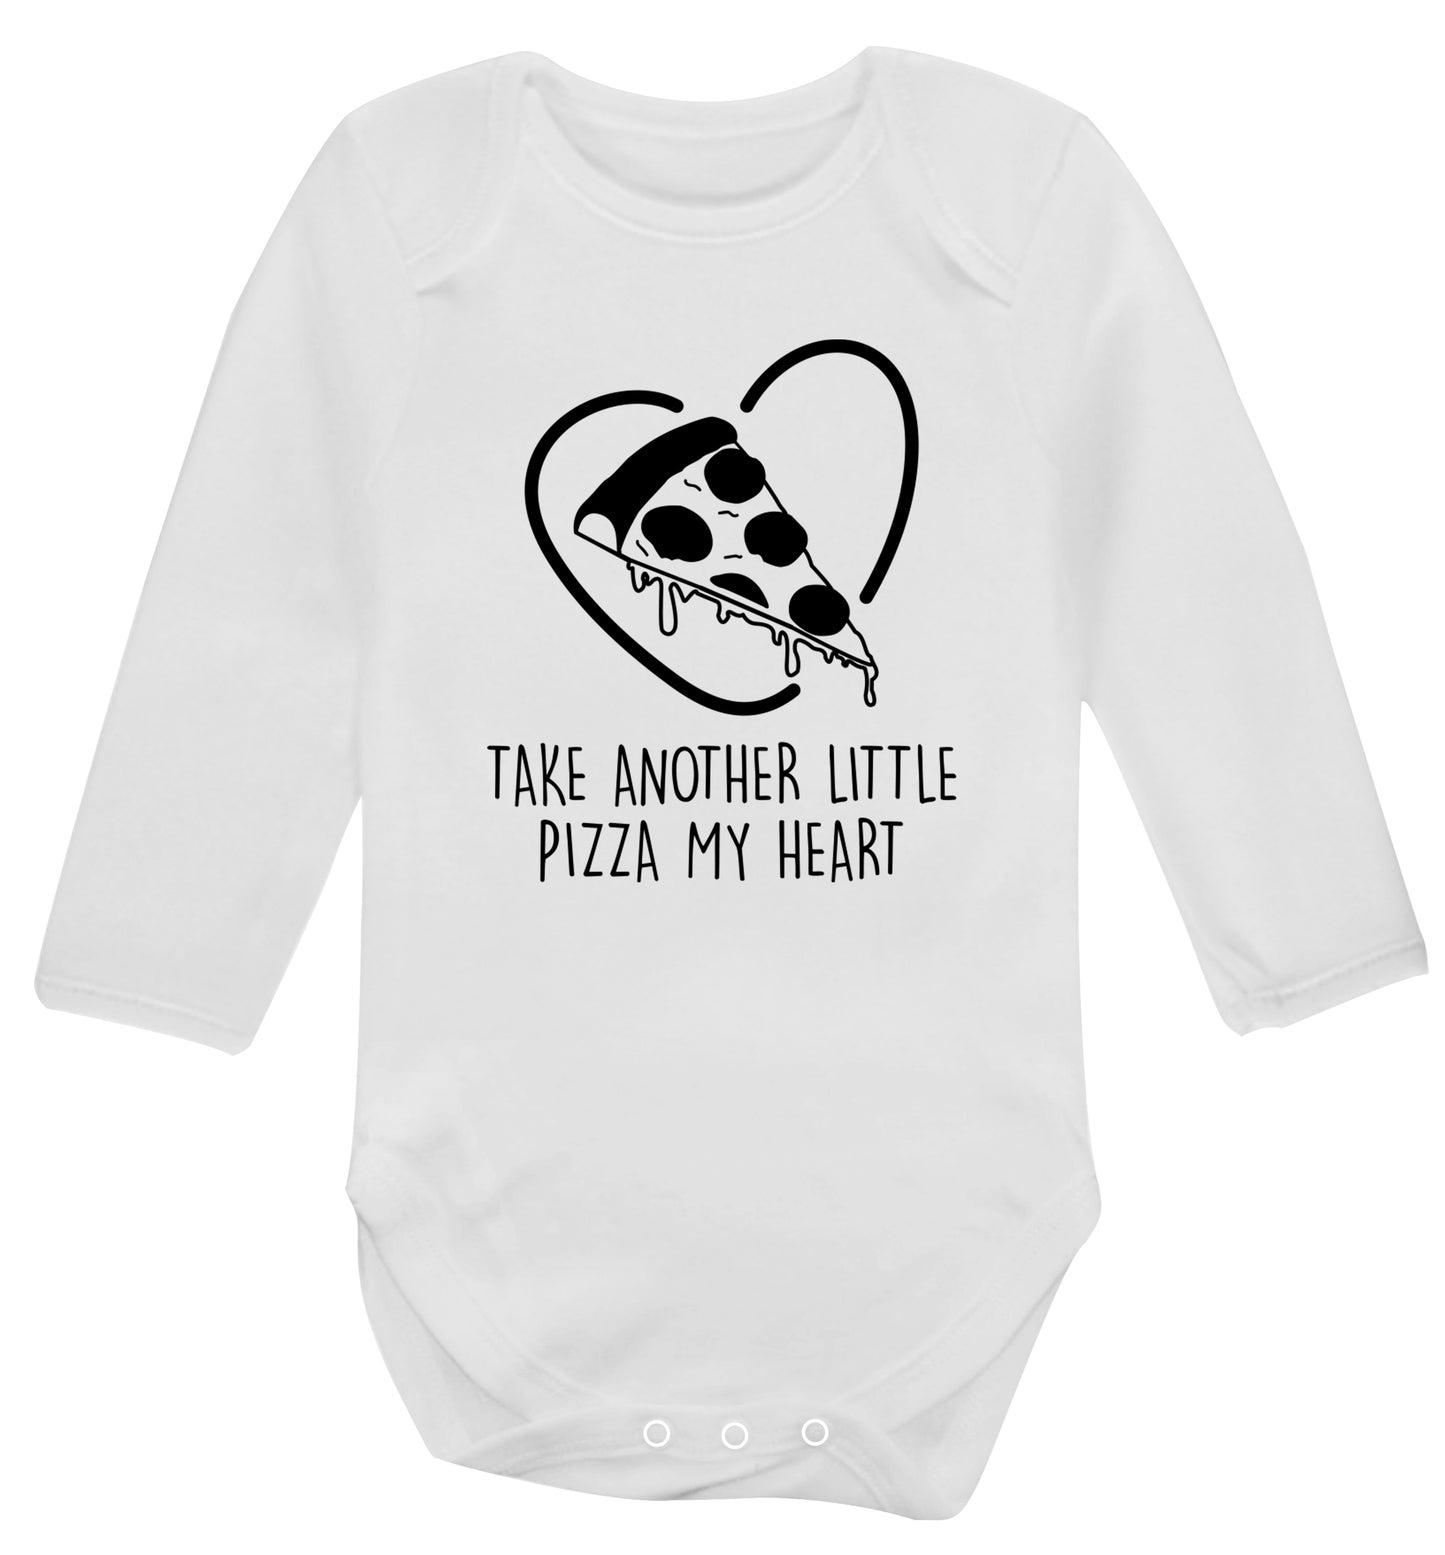 Take another little pizza my heart Baby Vest long sleeved white 6-12 months